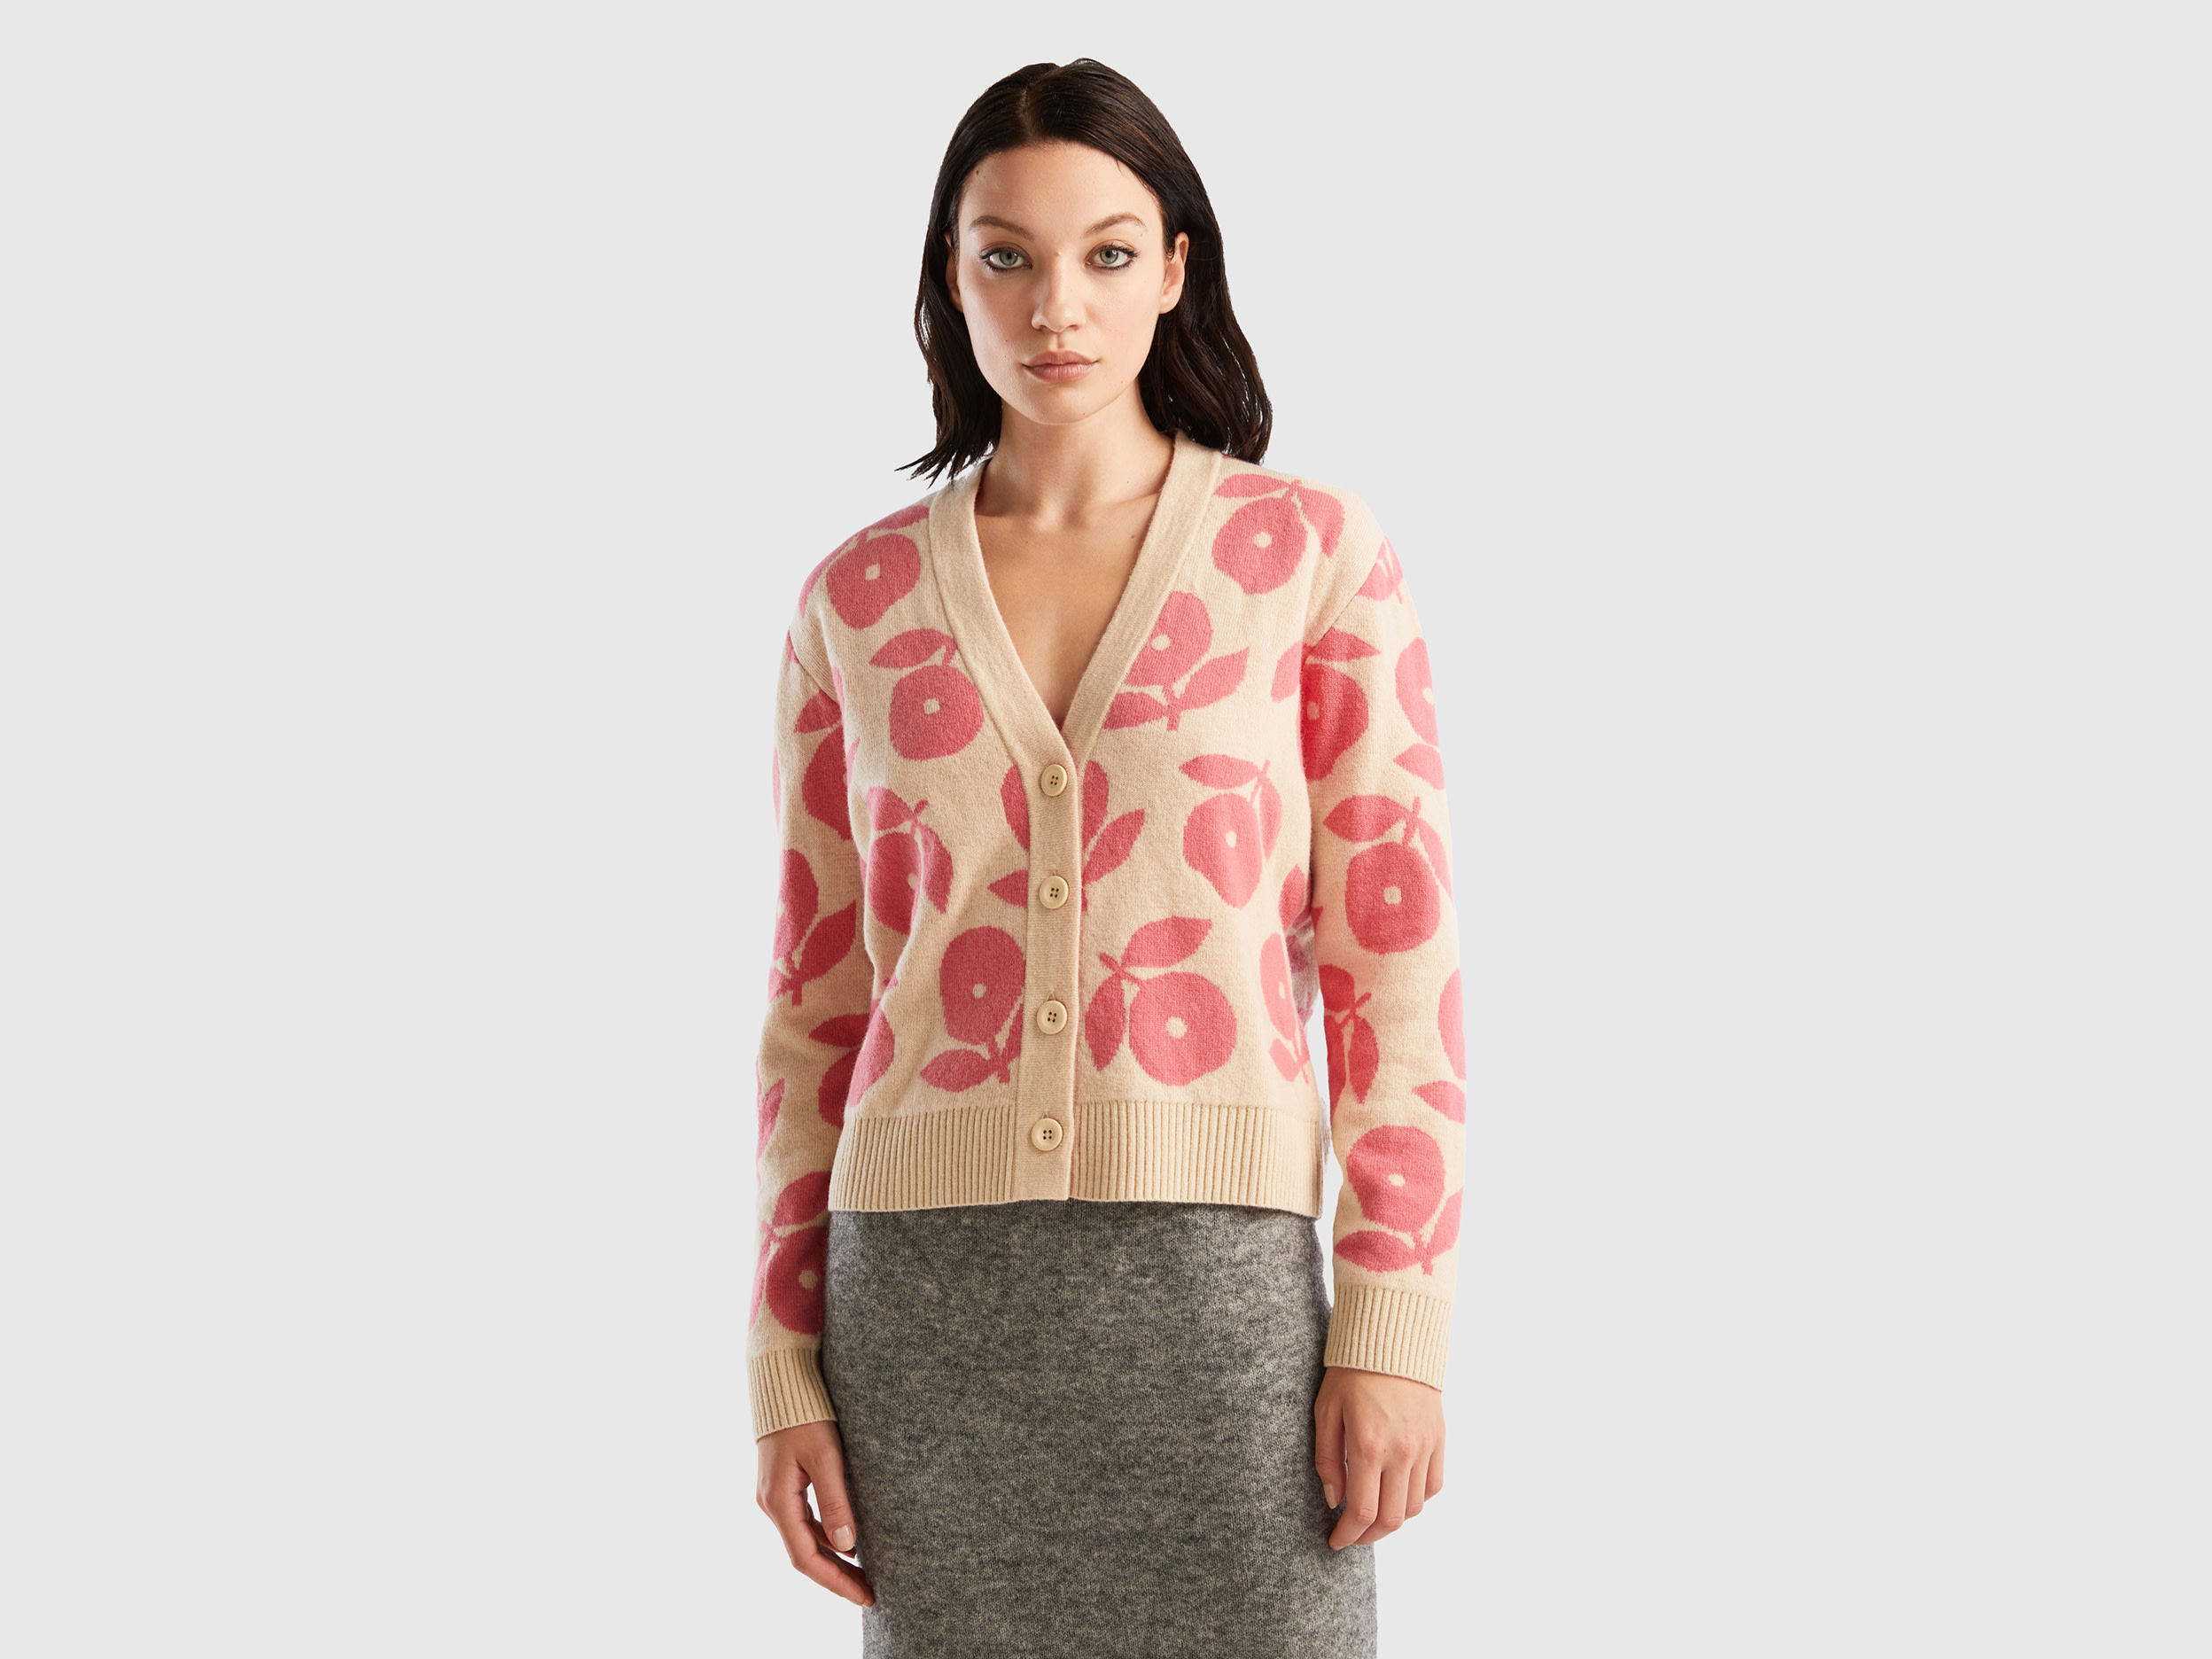 Benetton, Cardigan With Floral Inlays, size L-XL, Beige, Women